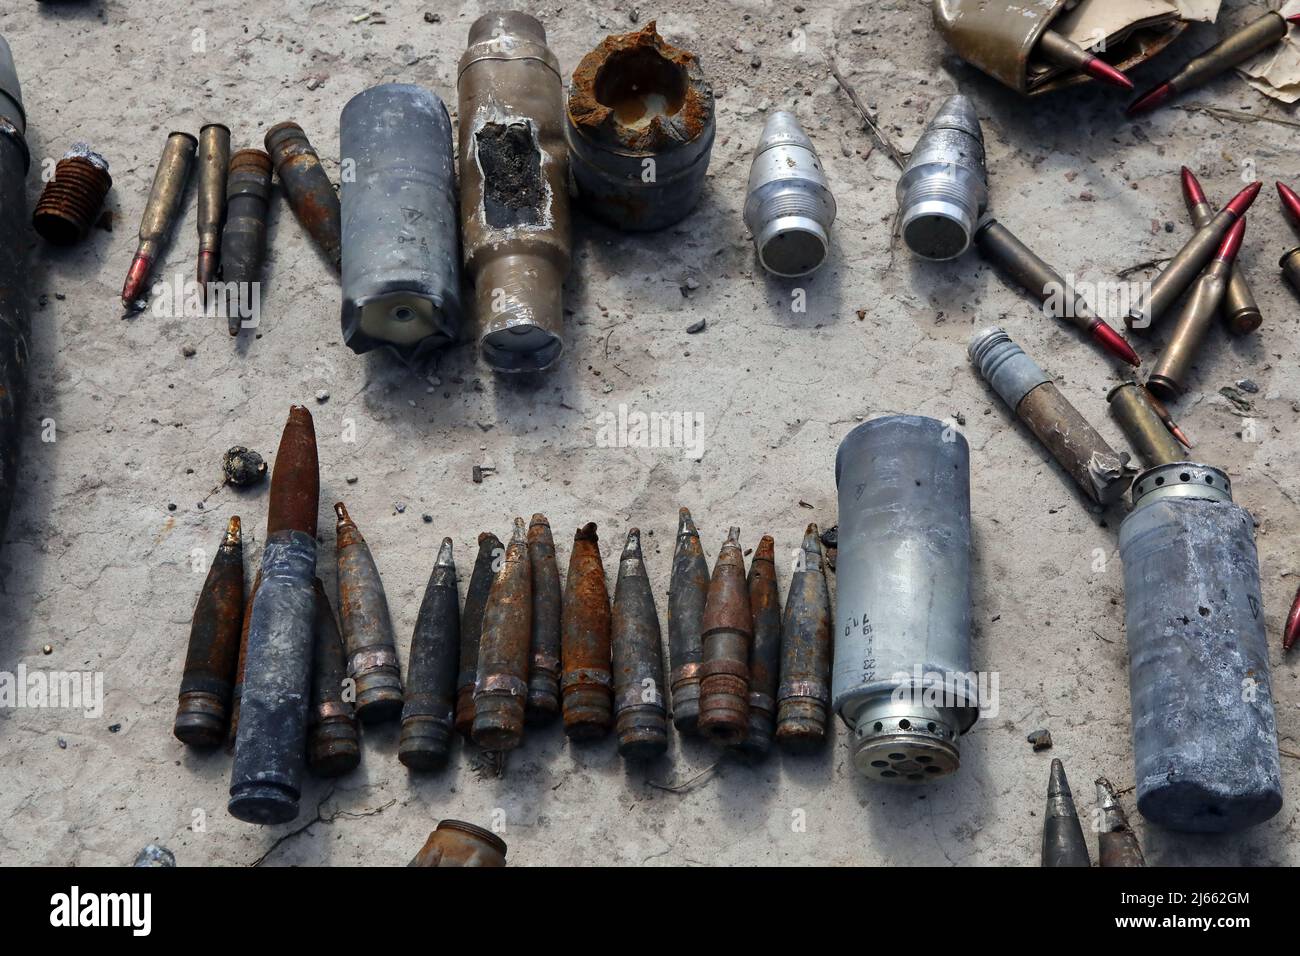 KYIV REGION, UKRAINE - APRIL 27, 2022 - Ammunition is arranged on the premises of Antonov Airport, an international cargo airport that became the site Stock Photo